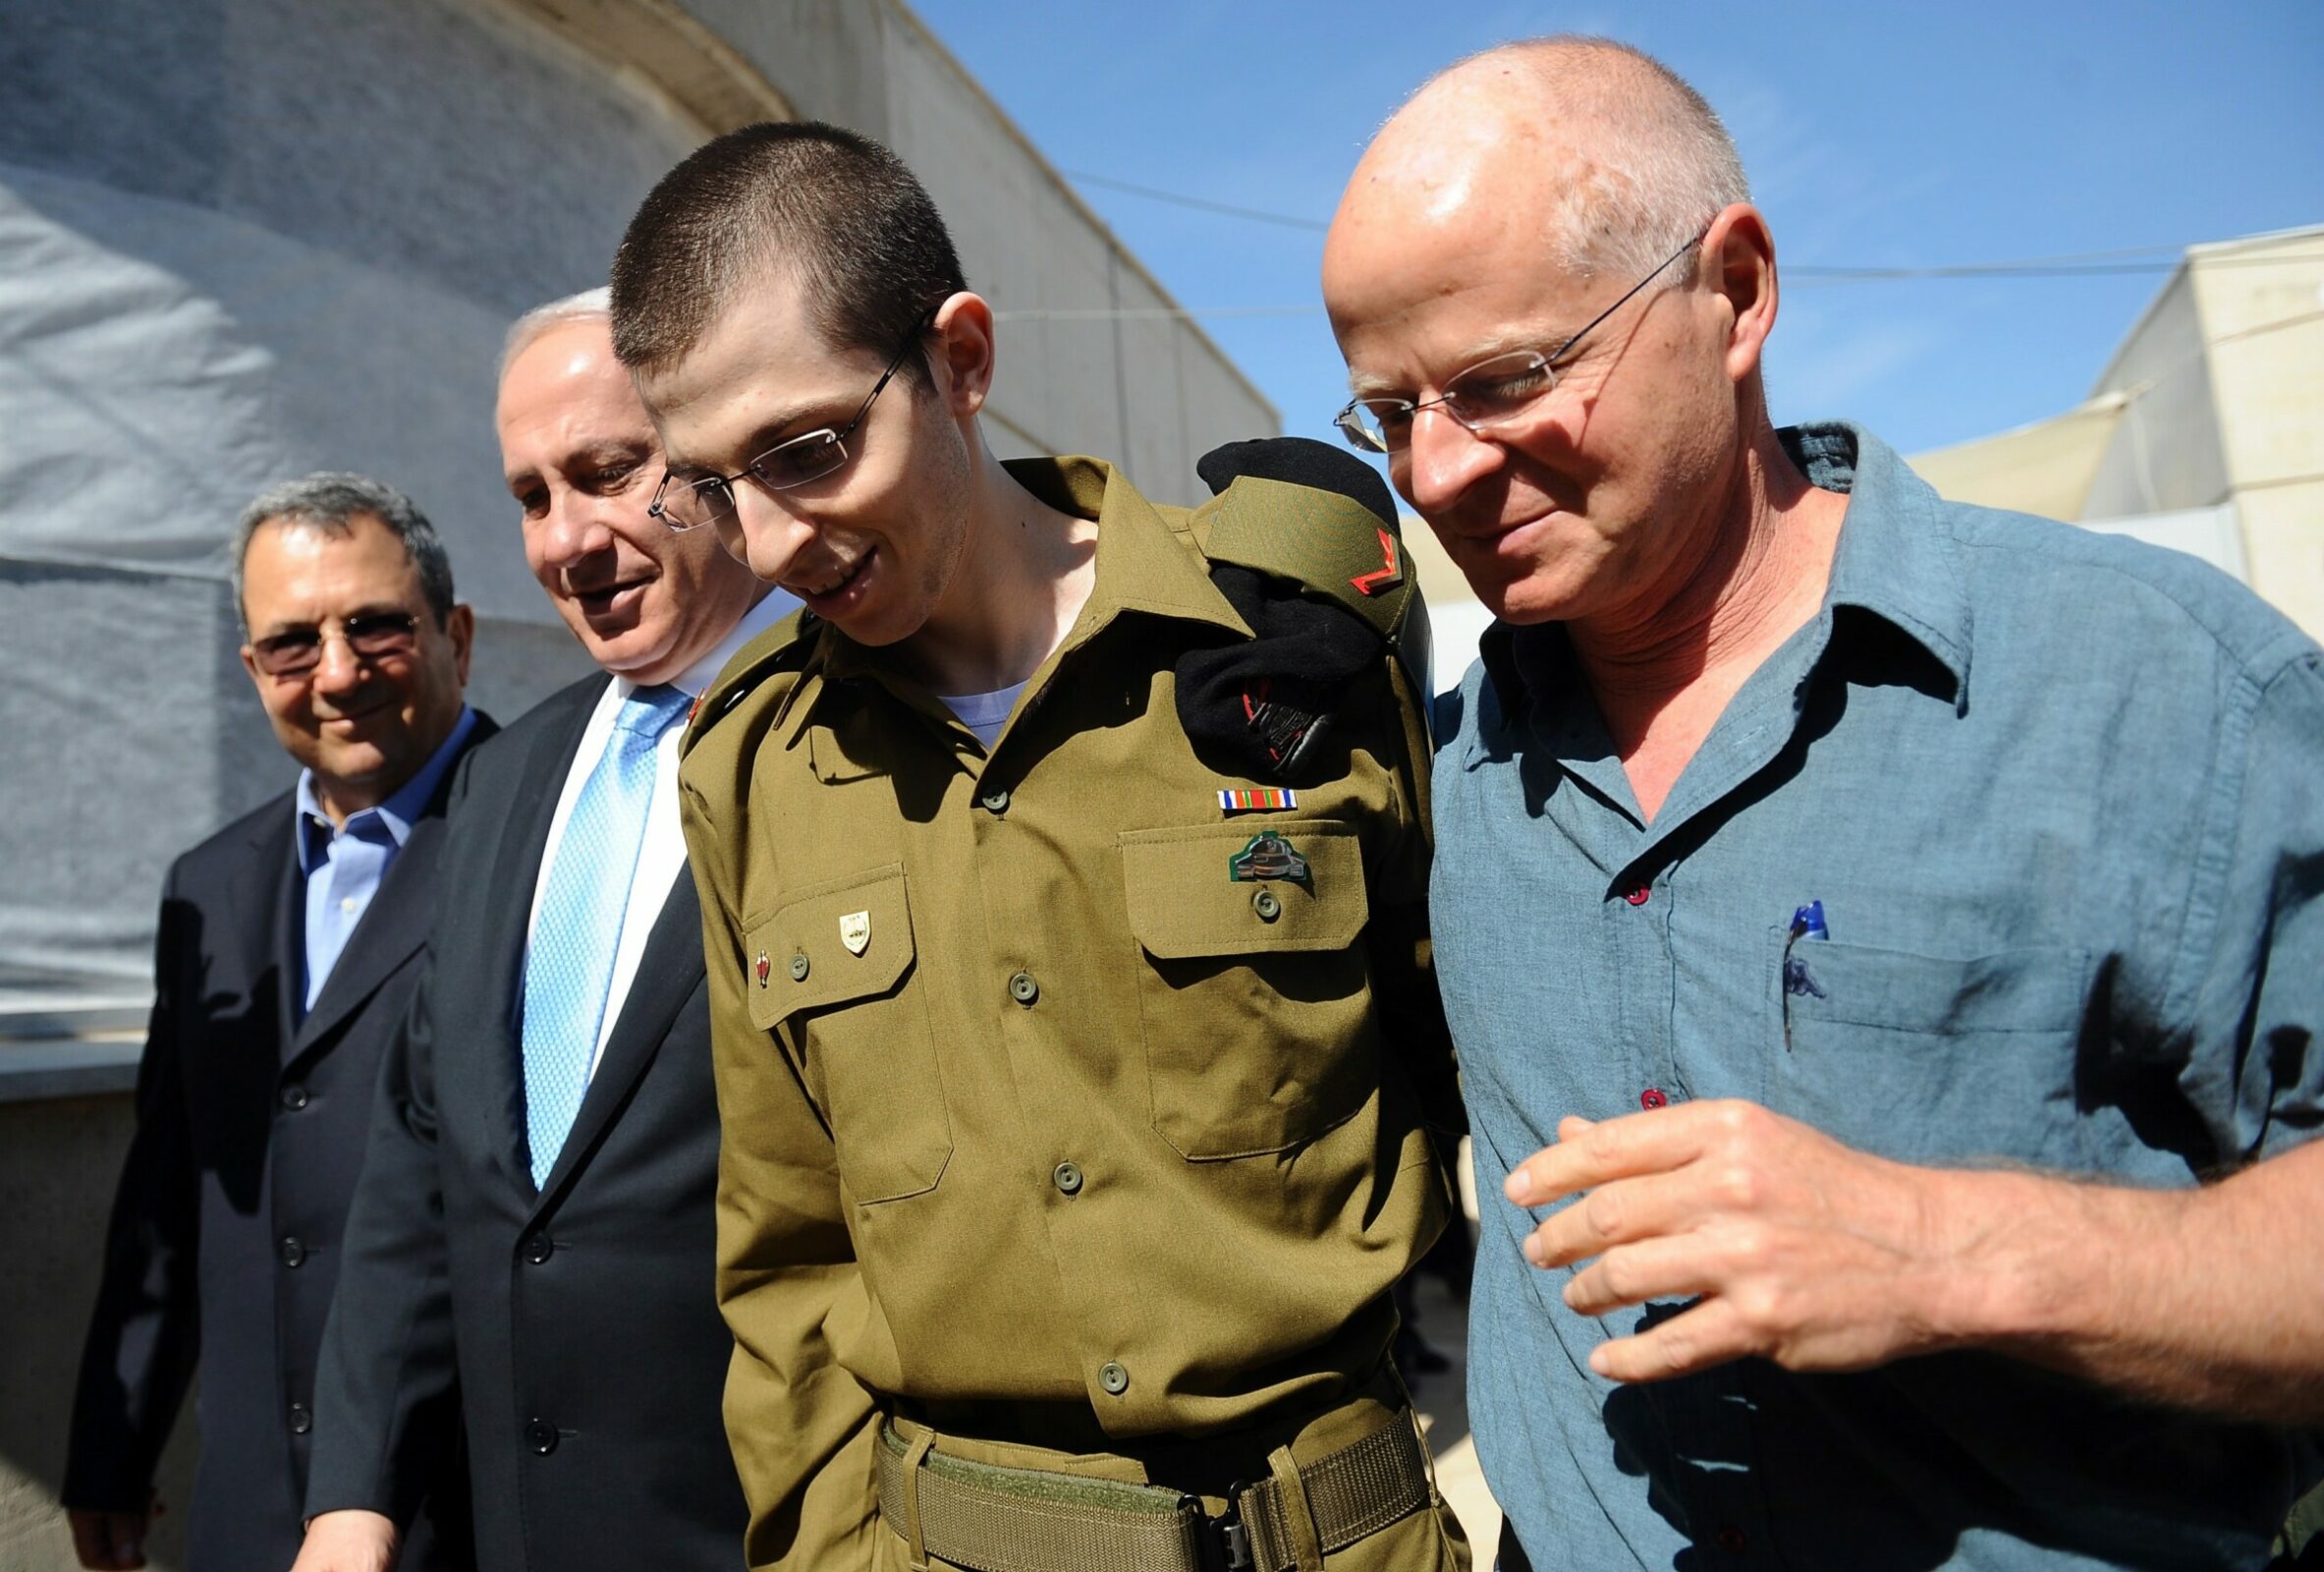 The Israeli Defence Forces (IDF) on 18 October 2011 shows released Israeli soldier Gilad Shalit (center) being accompanied by his father Noam (right), Israeli Prime Minister Benjamin Netanyahu (second from the right), and Defense Minister Ehud Barak (left), as he arrives by helicopter at the Tel Nof air base in central Israel after his release from 1,941 days of captivity in the Gaza Strip, on 18 October 2011. Shalit was released in exchange for 1,027 Palestinians in Israeli jails.